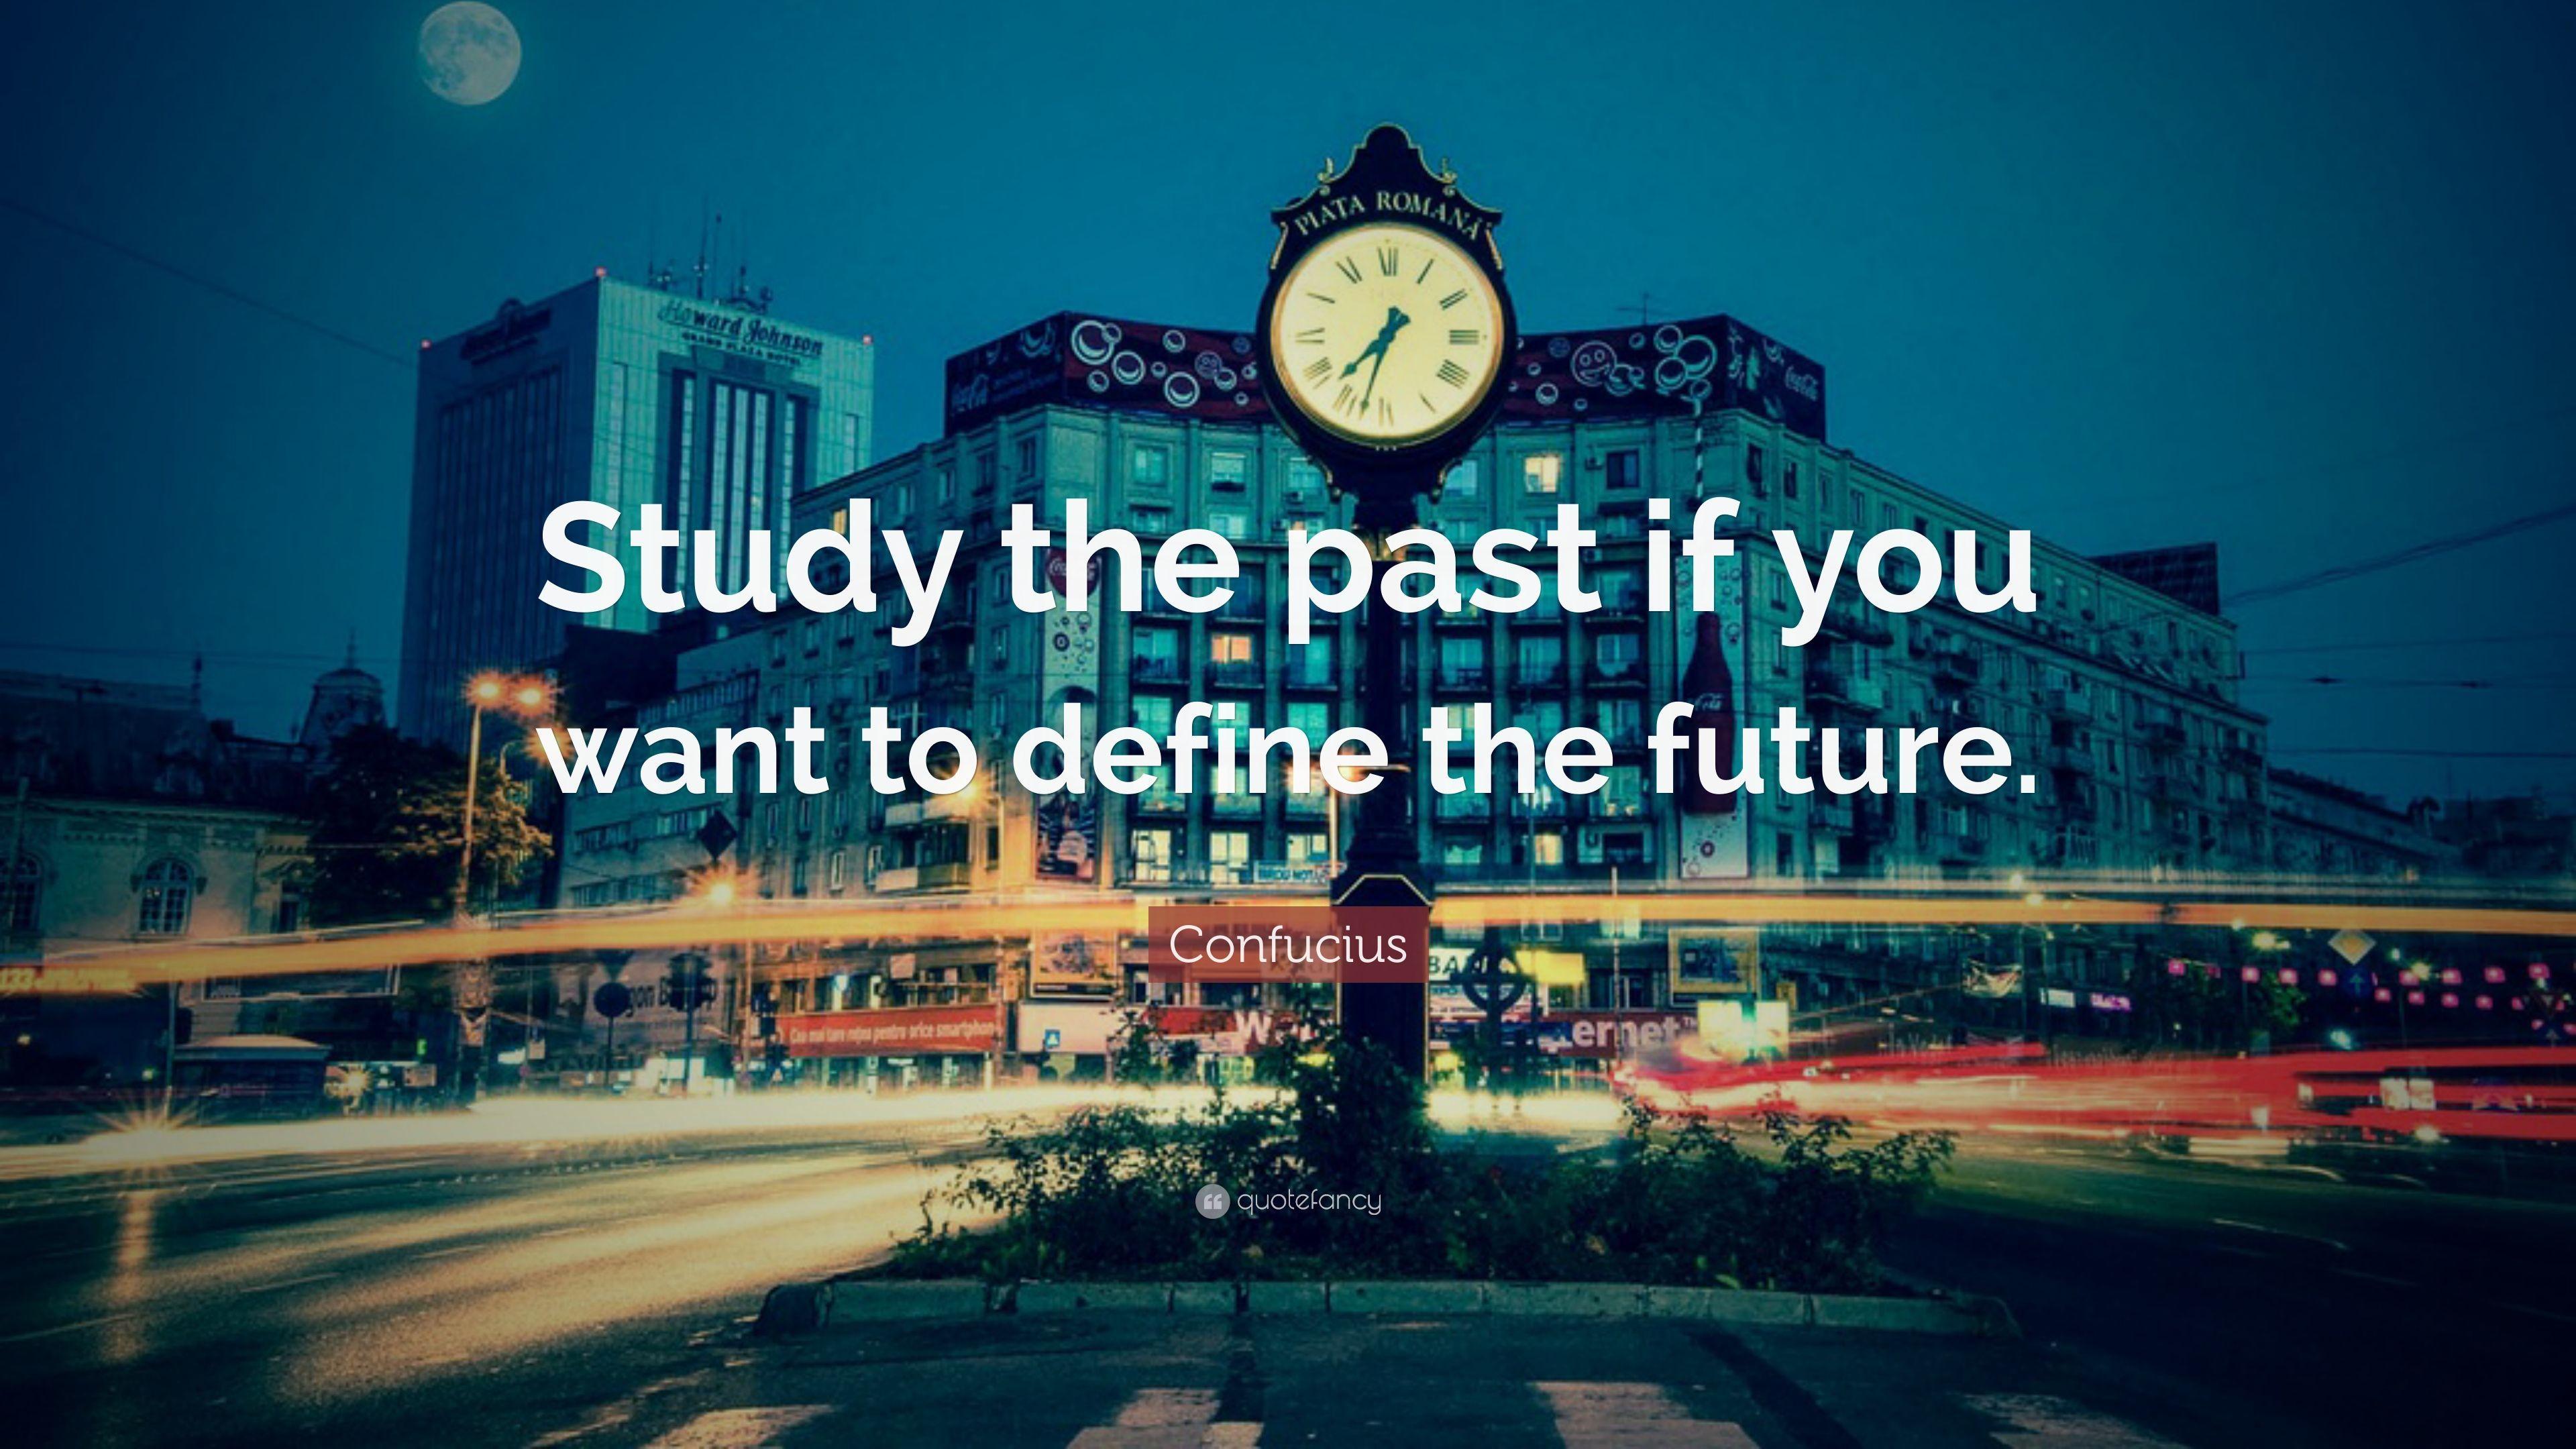 Confucius Quote: “Study the past if you want to define the future